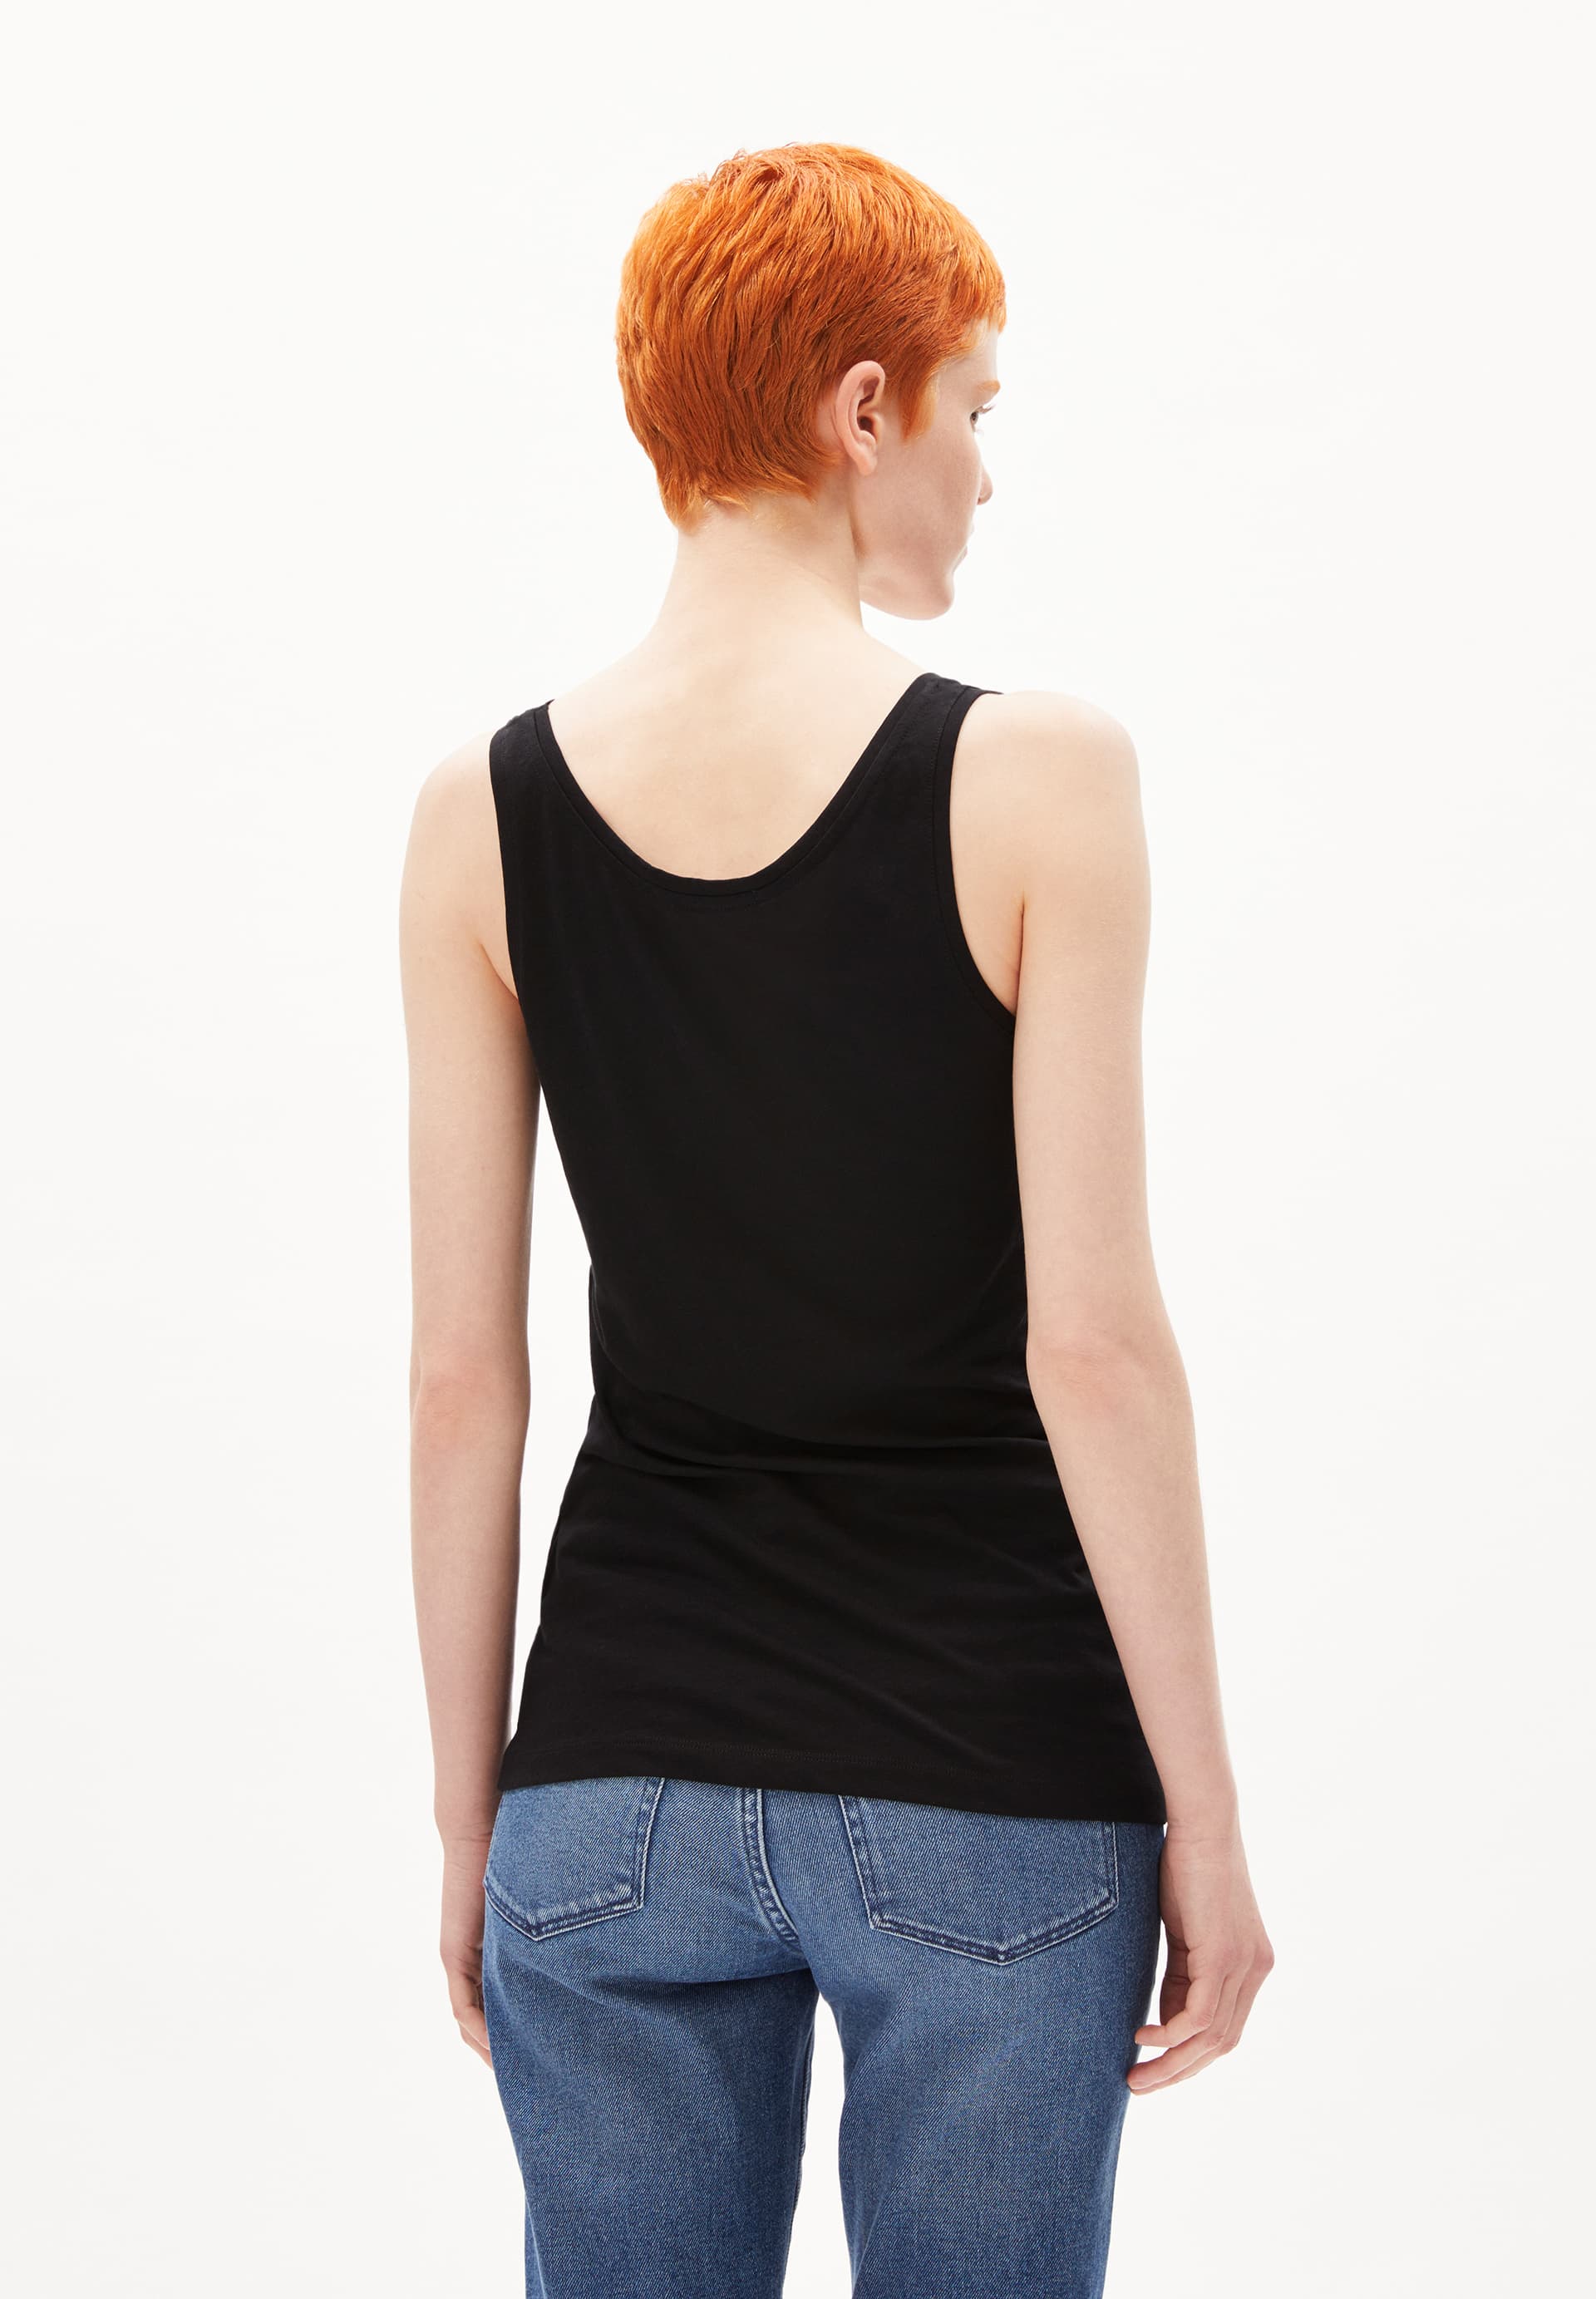 BELISAA SOFT Top Slim Fit made of Organic Cotton